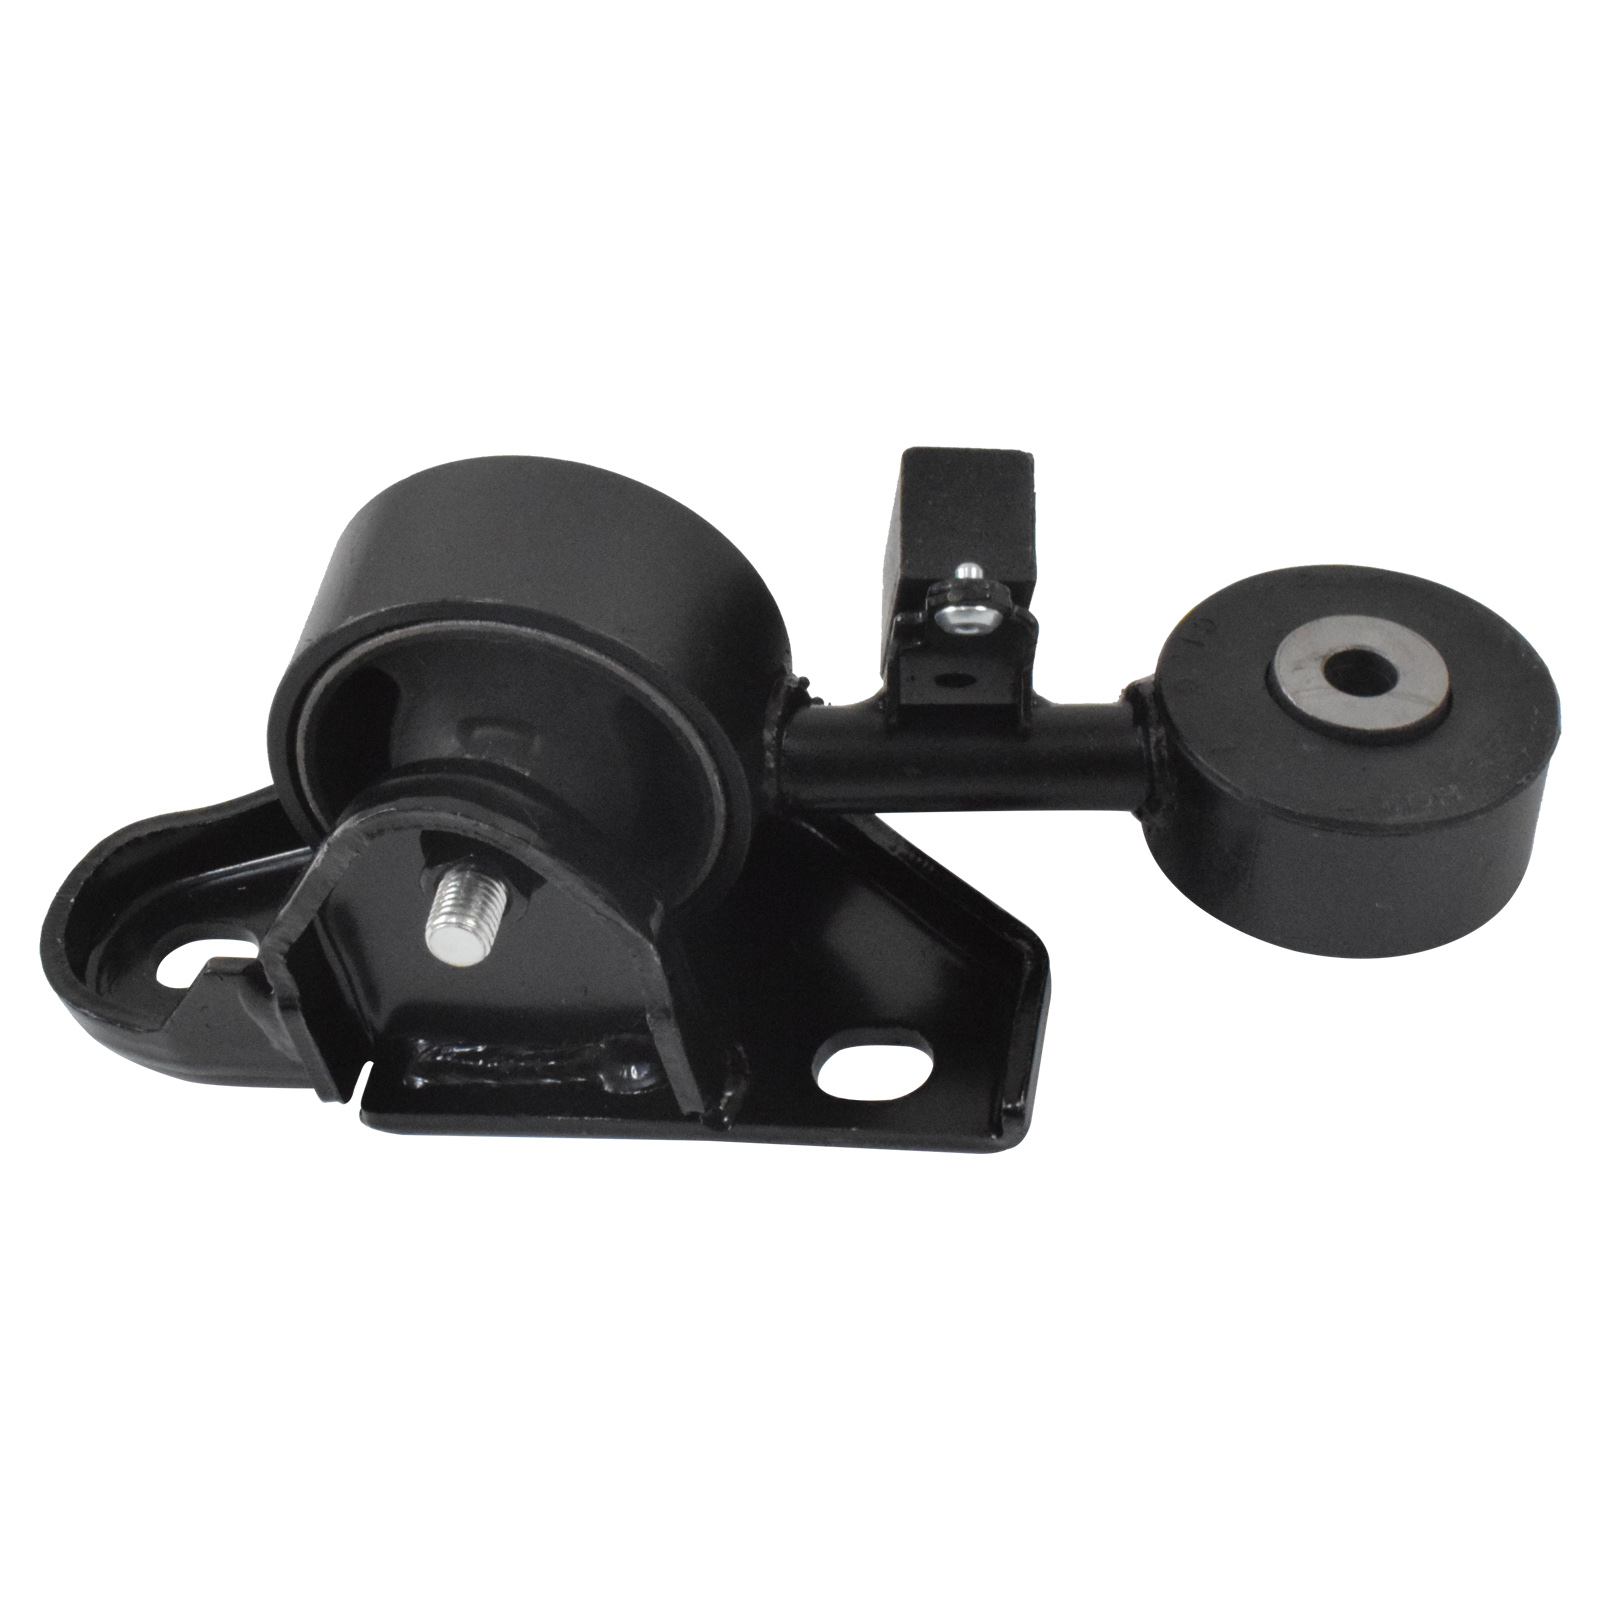 RH Auto/Manual  Engine Mount To Suit Toyota Camry ACV36R   02-06  2.4L